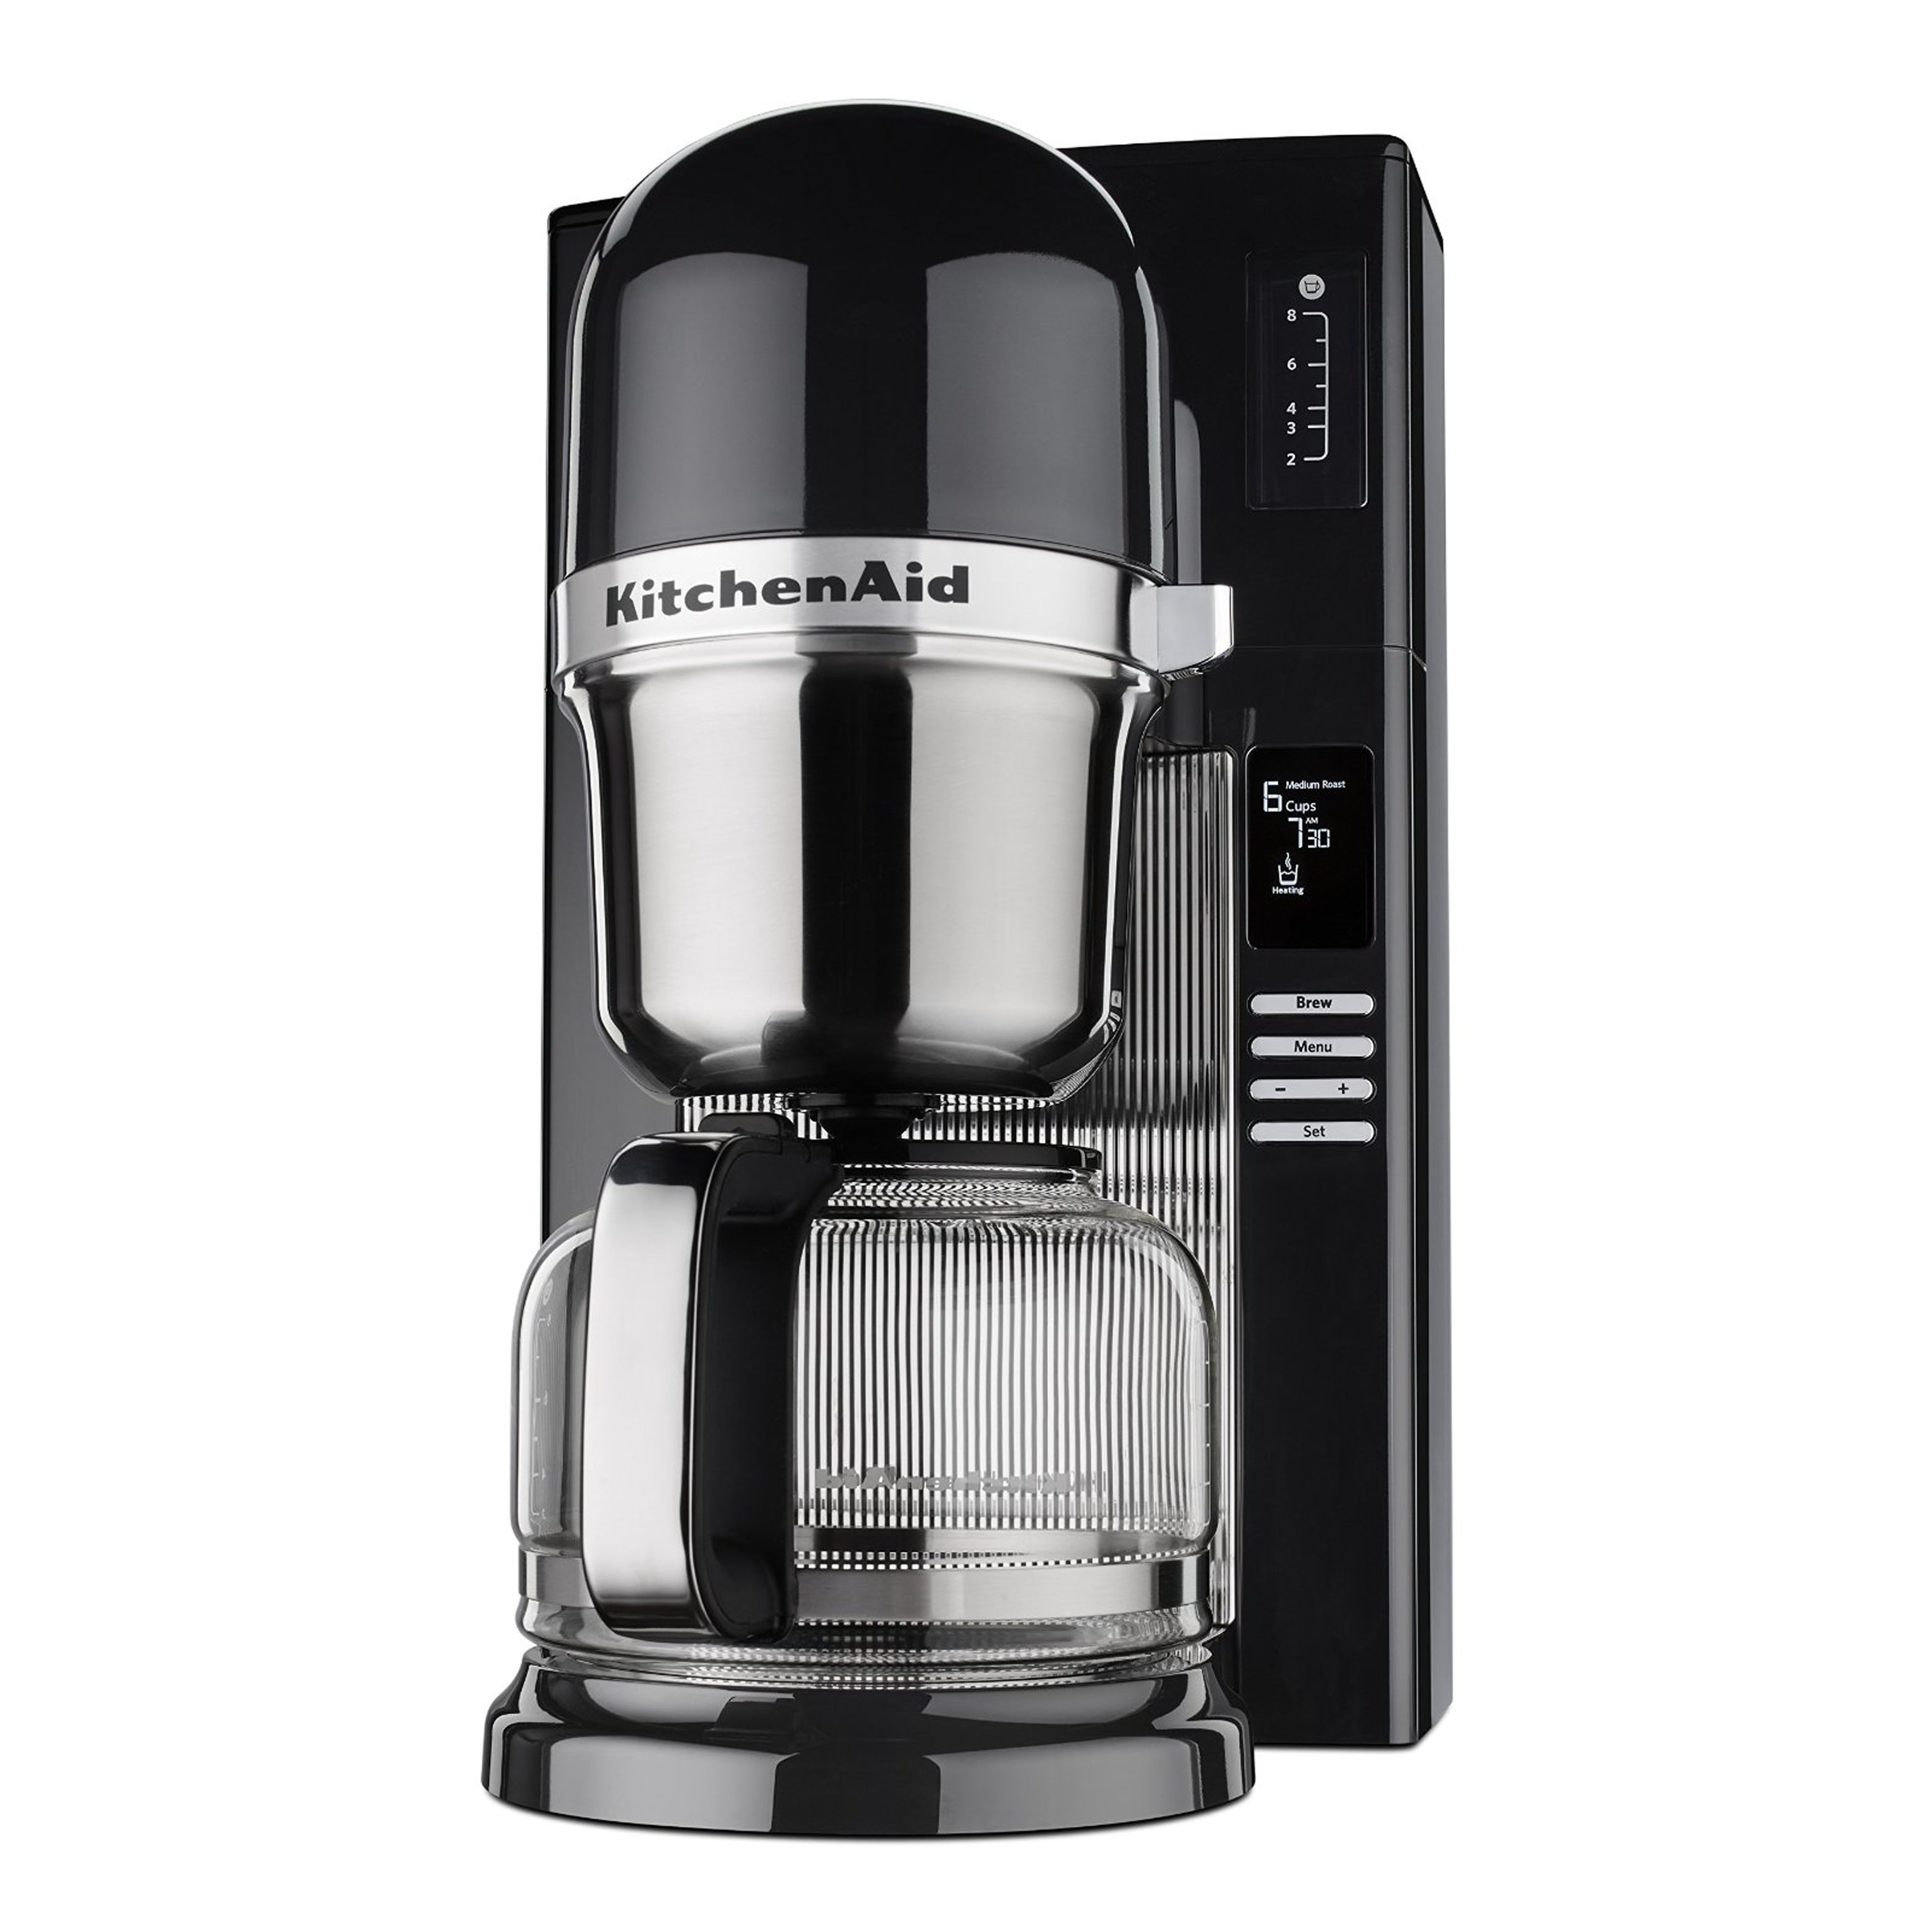 KitchenAid Custom Pour Over Coffeemaker Review, Price and Features